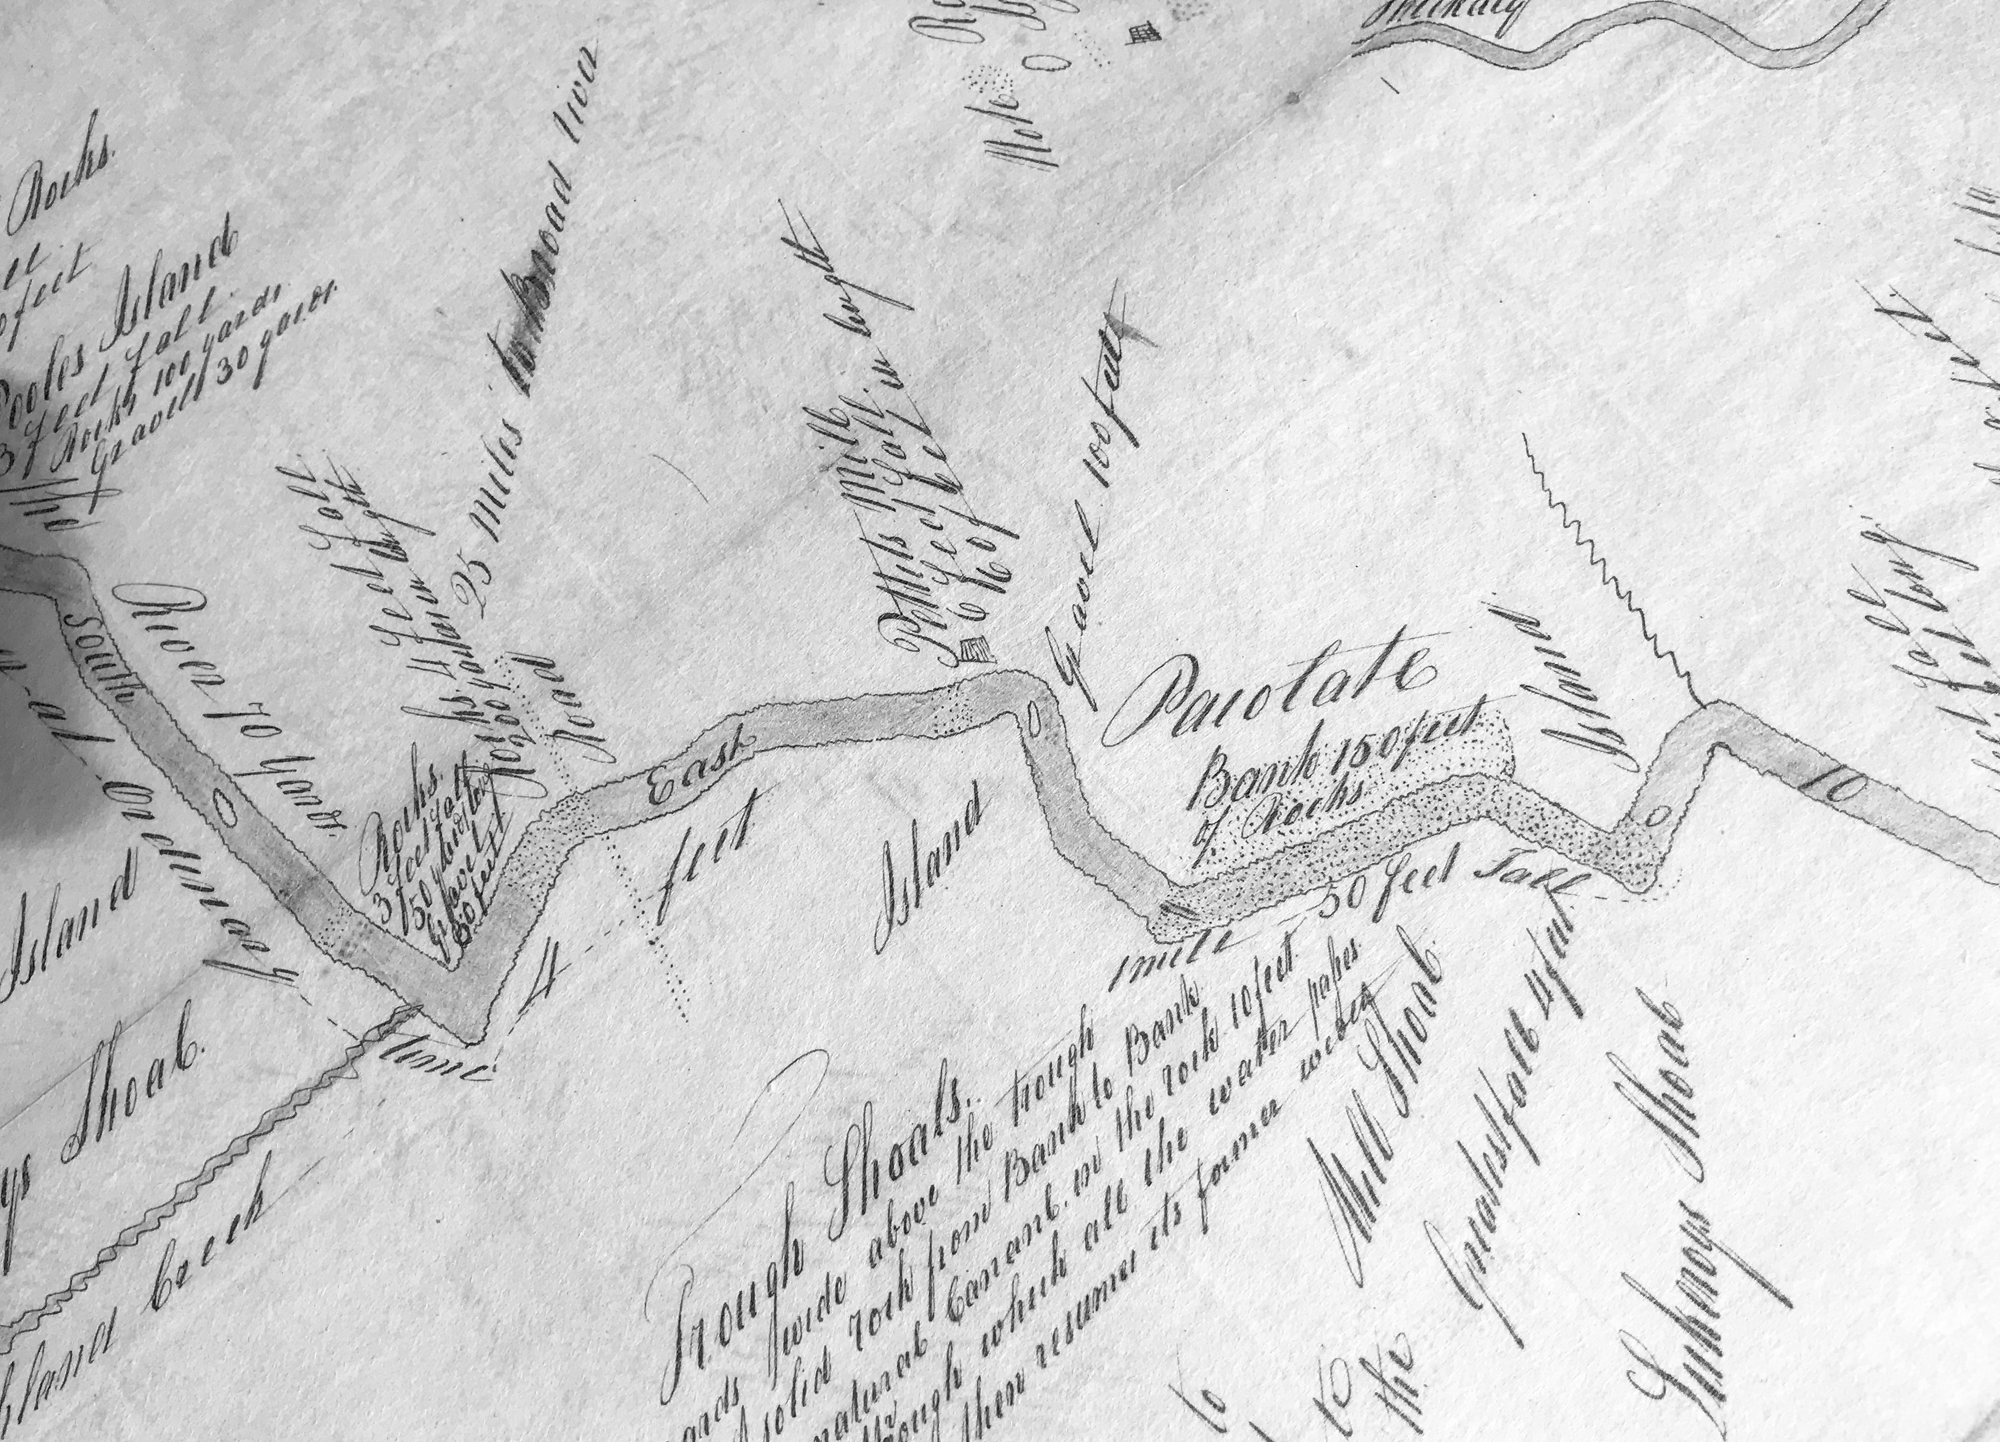 EARLY MAP OF TROUGH AND PACOLET AREA - SCDAH CANAL FILES, SEC II